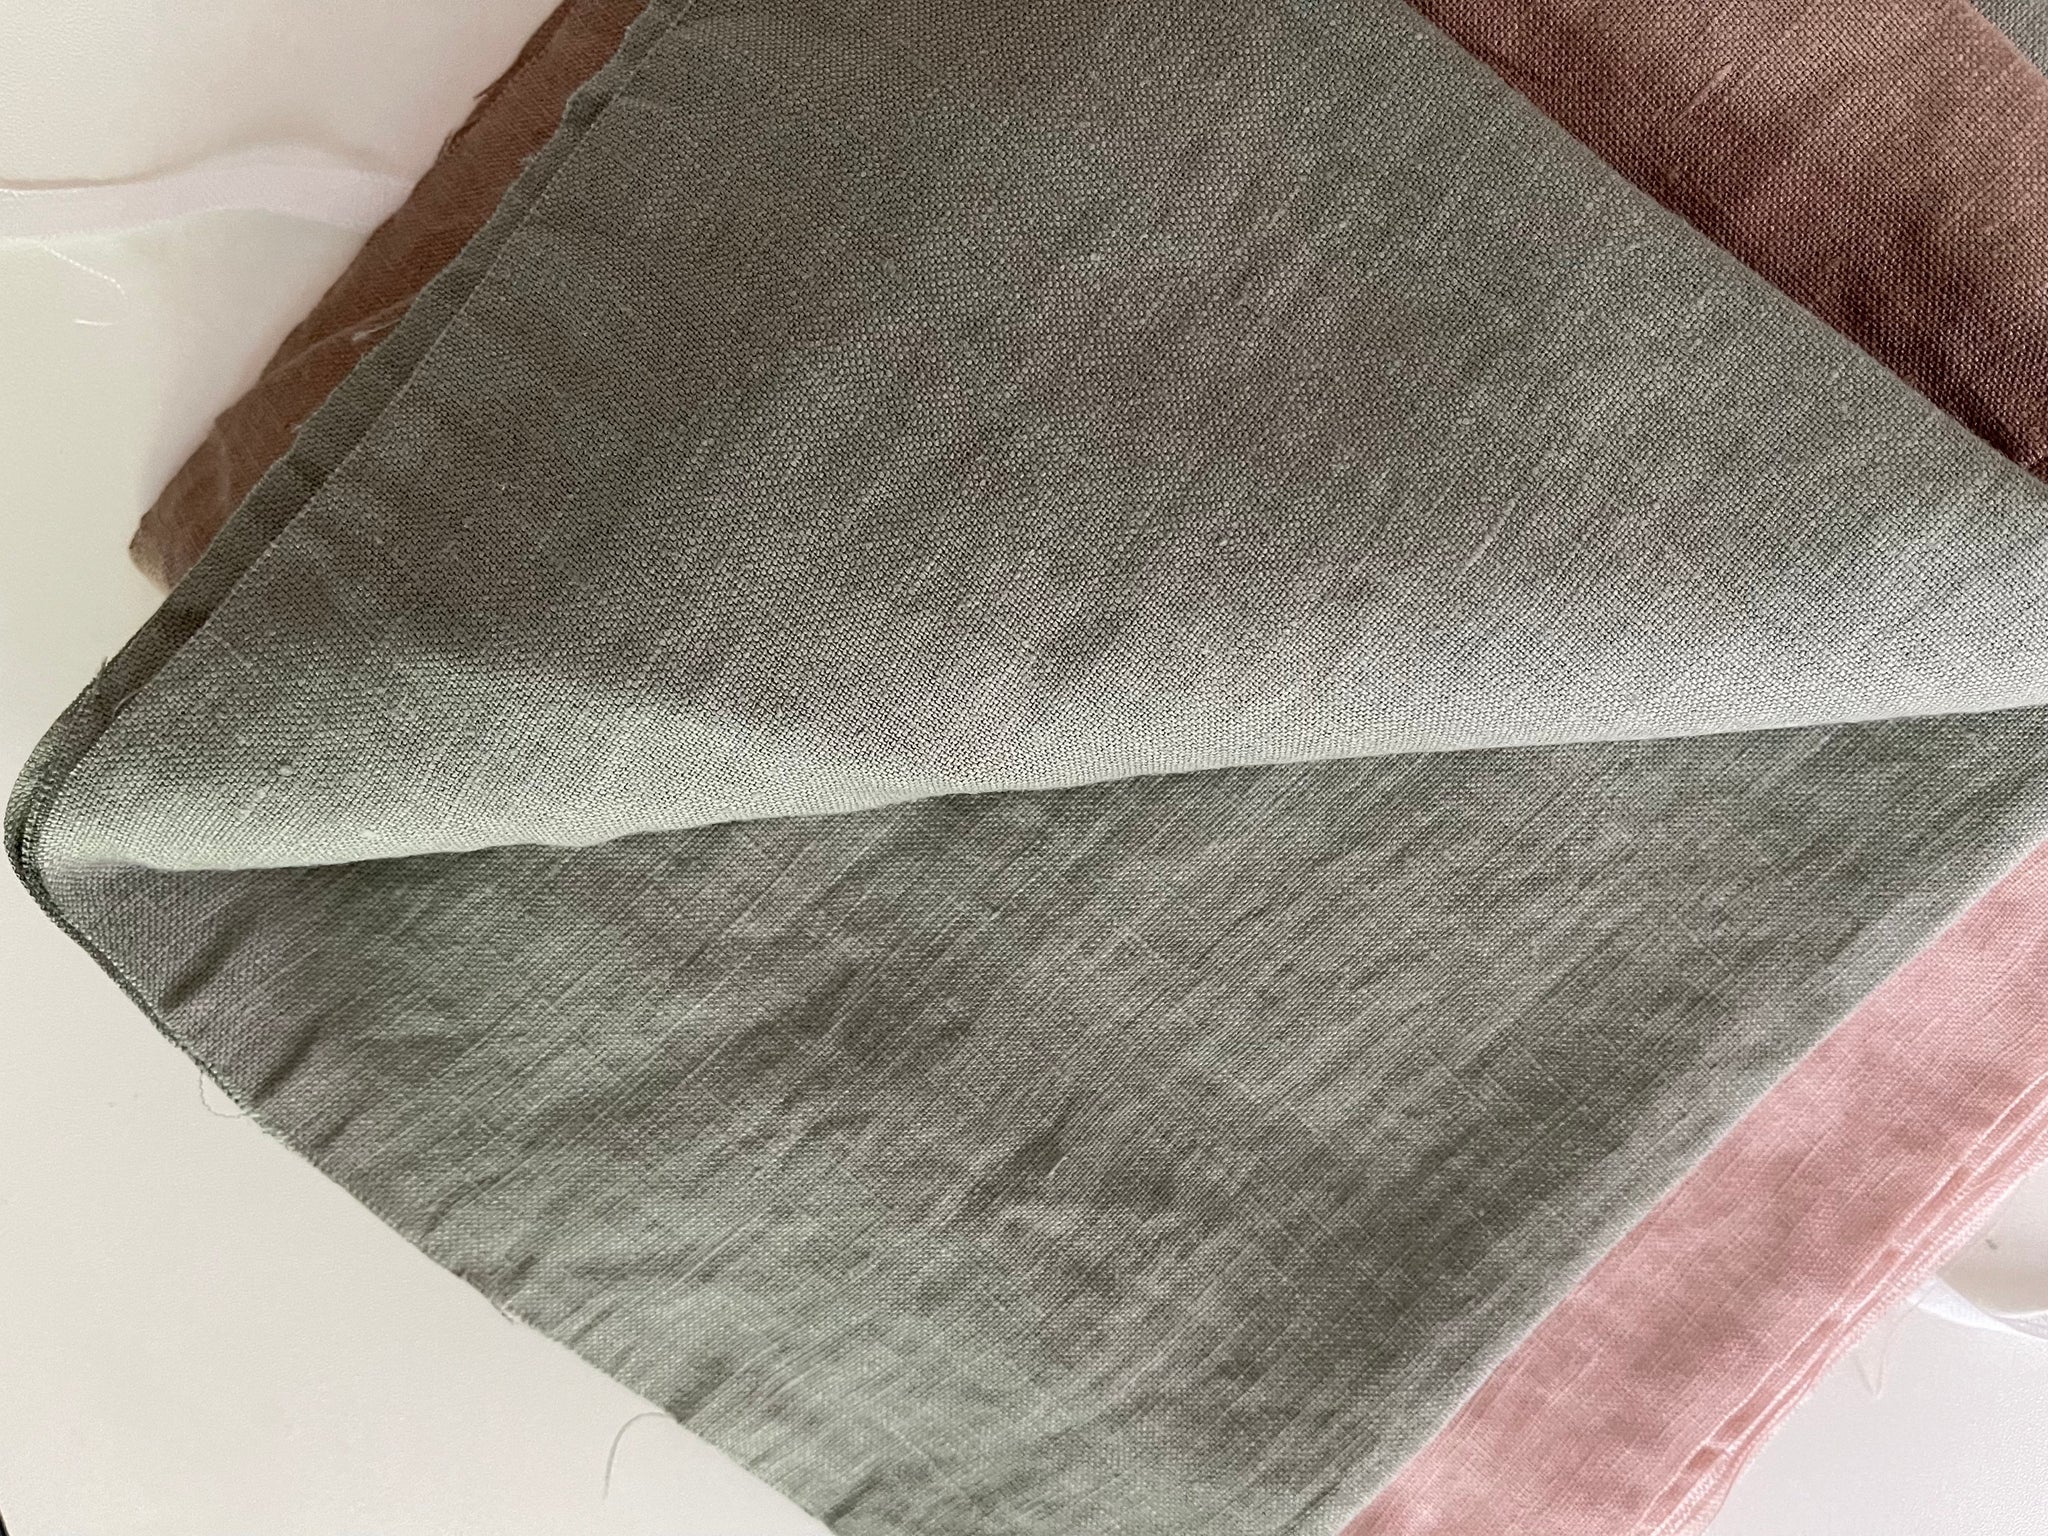 Linen Fabric Remnants - Sage Green, Dusty Rose, Desert Clay